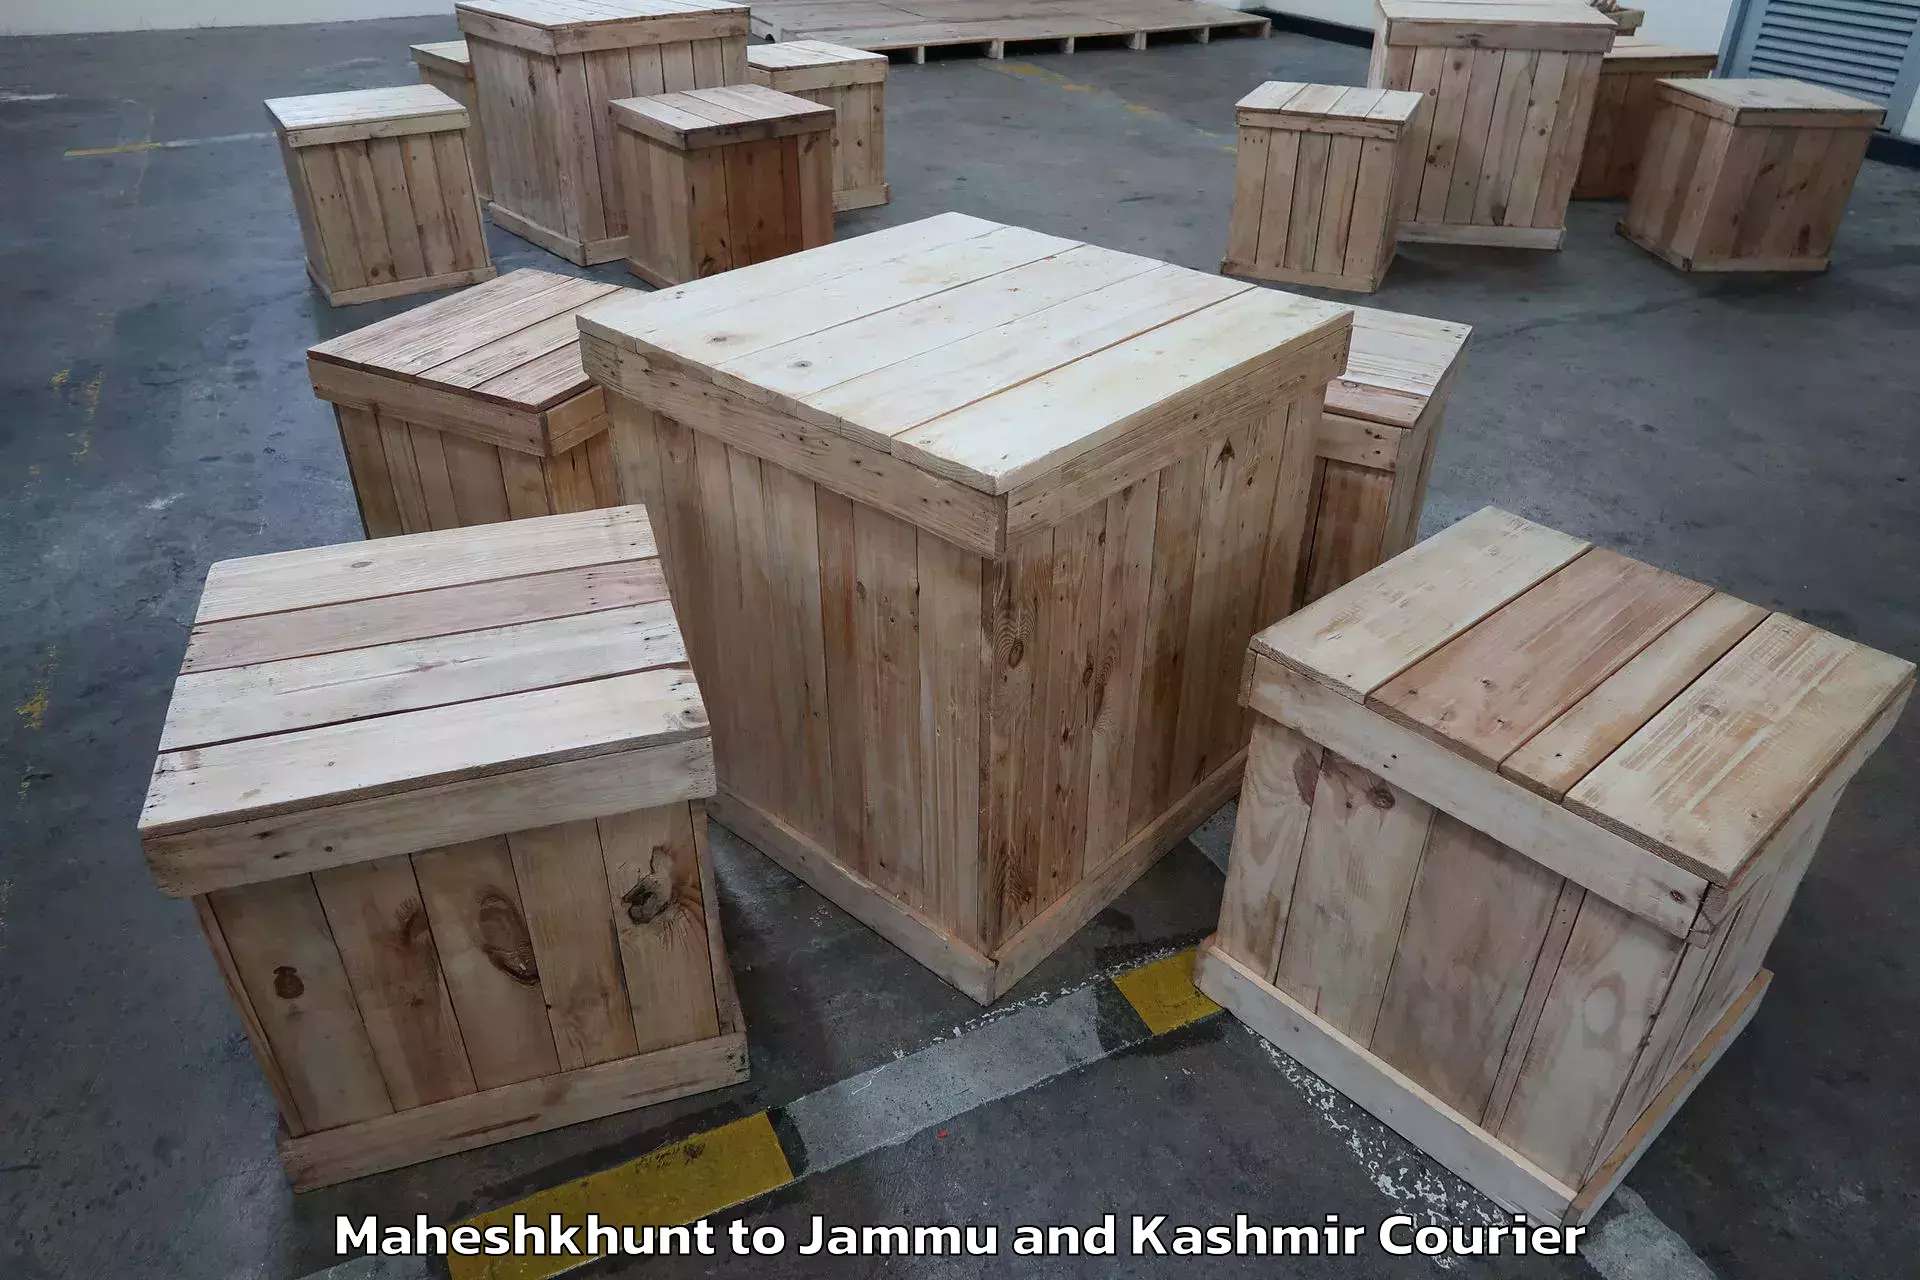 Dependable moving services in Maheshkhunt to Pulwama